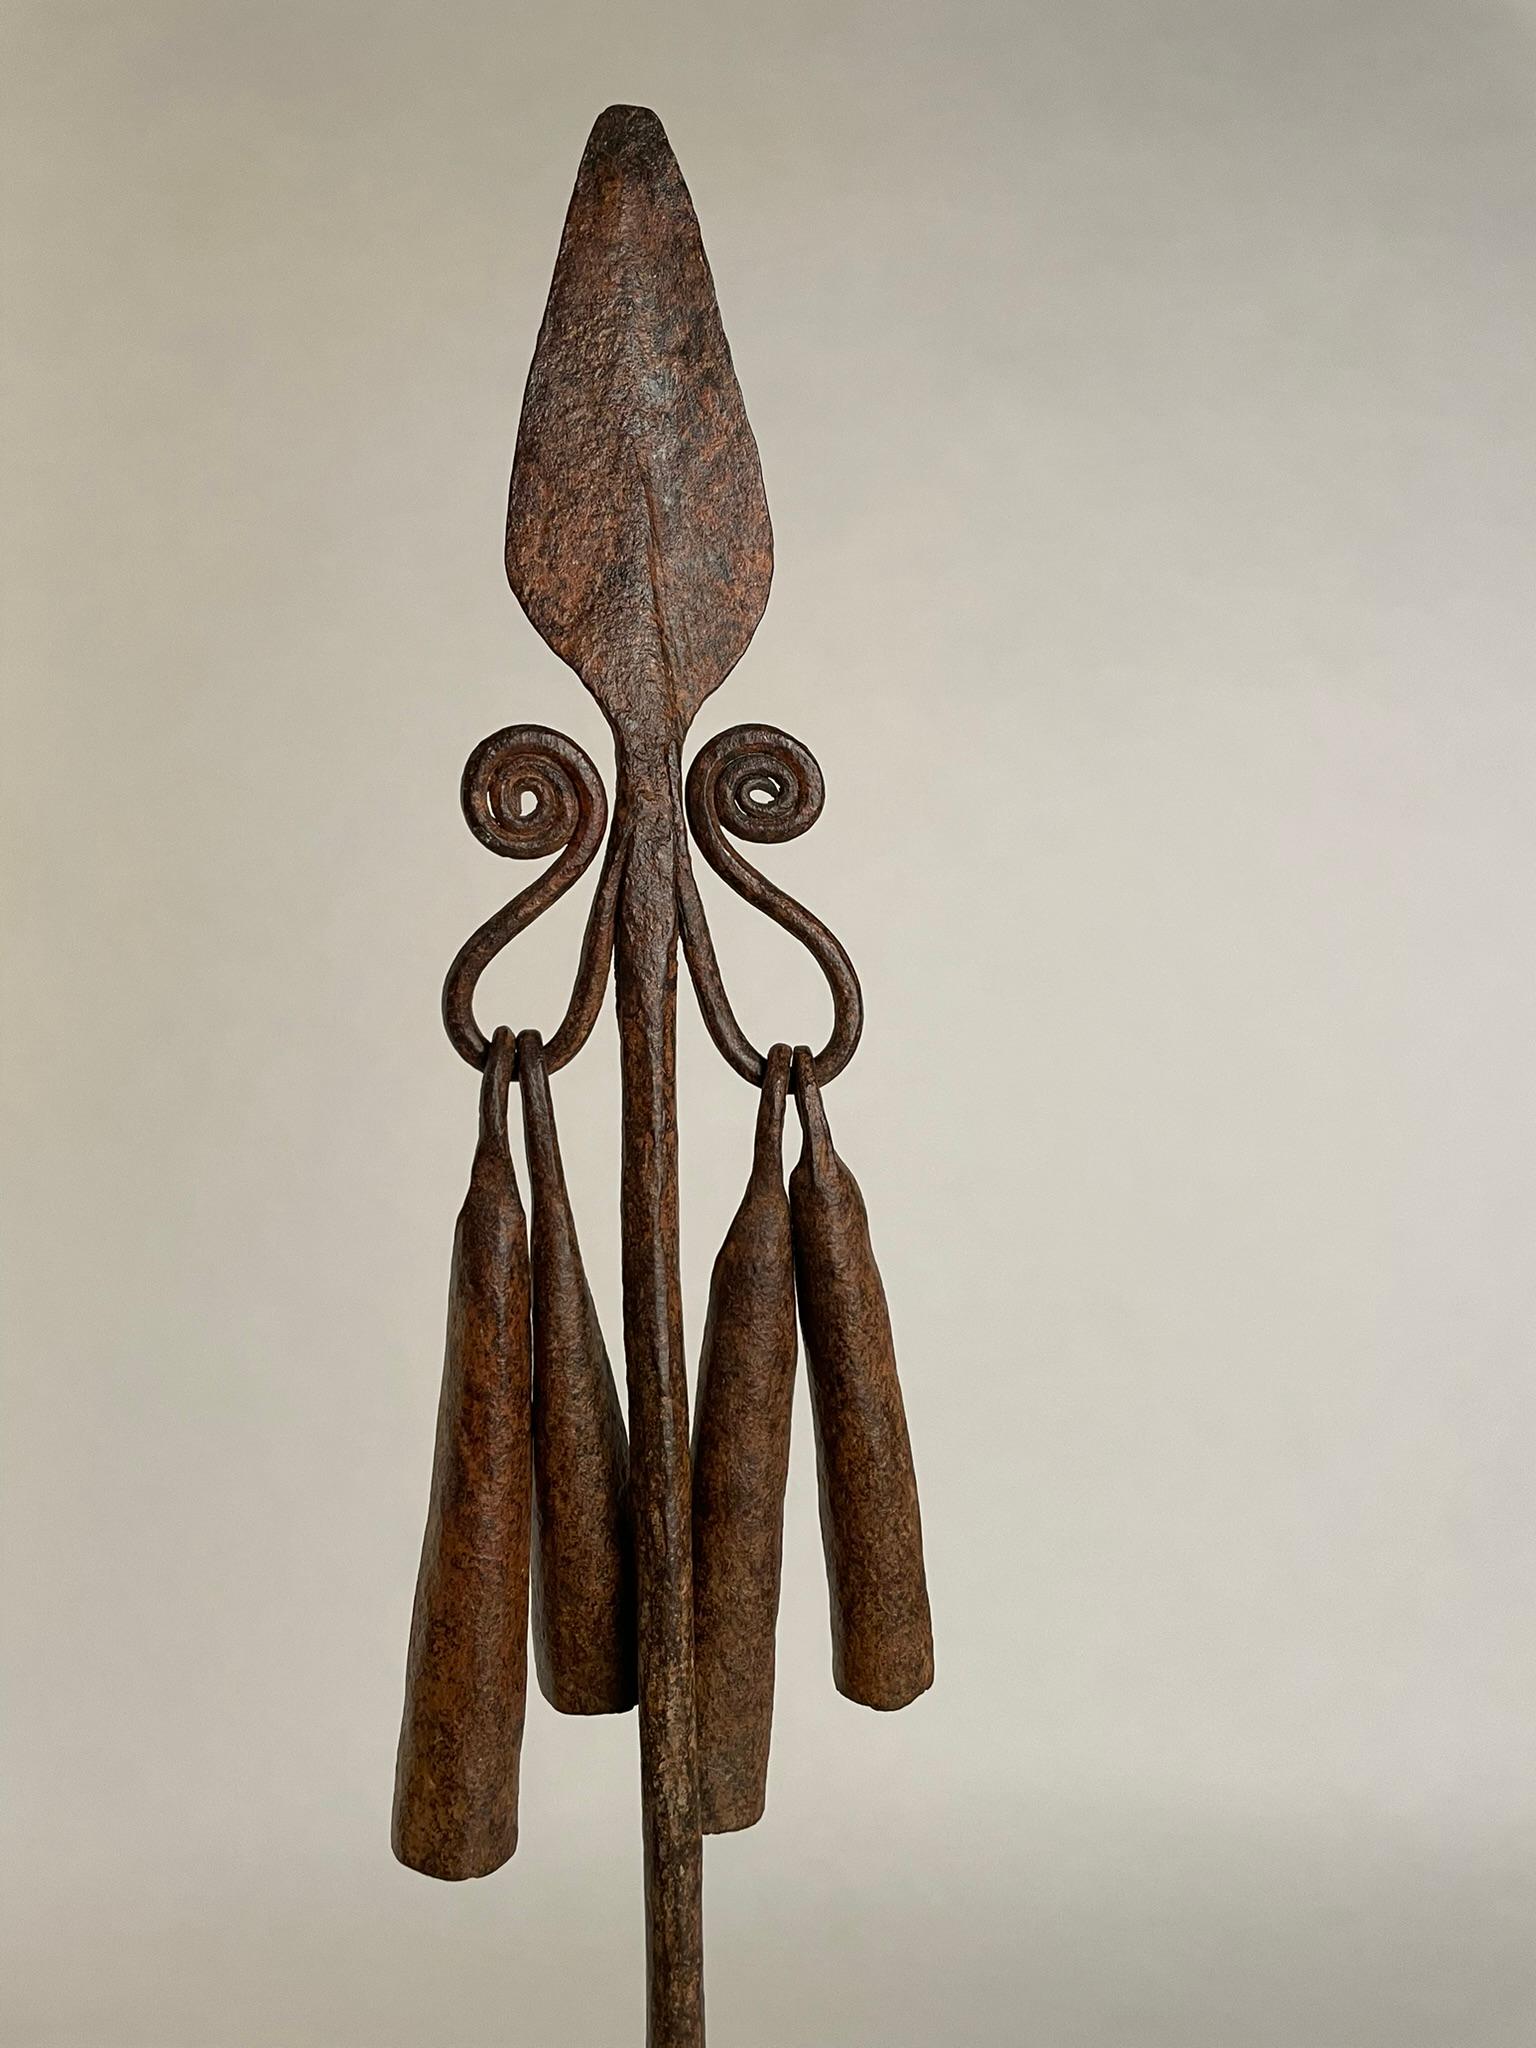 Wonderful spear form currency with spiral loops below the spear head festooned with three 'bells' on each side. An appealing design executed by a master craftsman. Beautifully mounted on a custom steel base. Democratic Republic of the Congo.
Nice